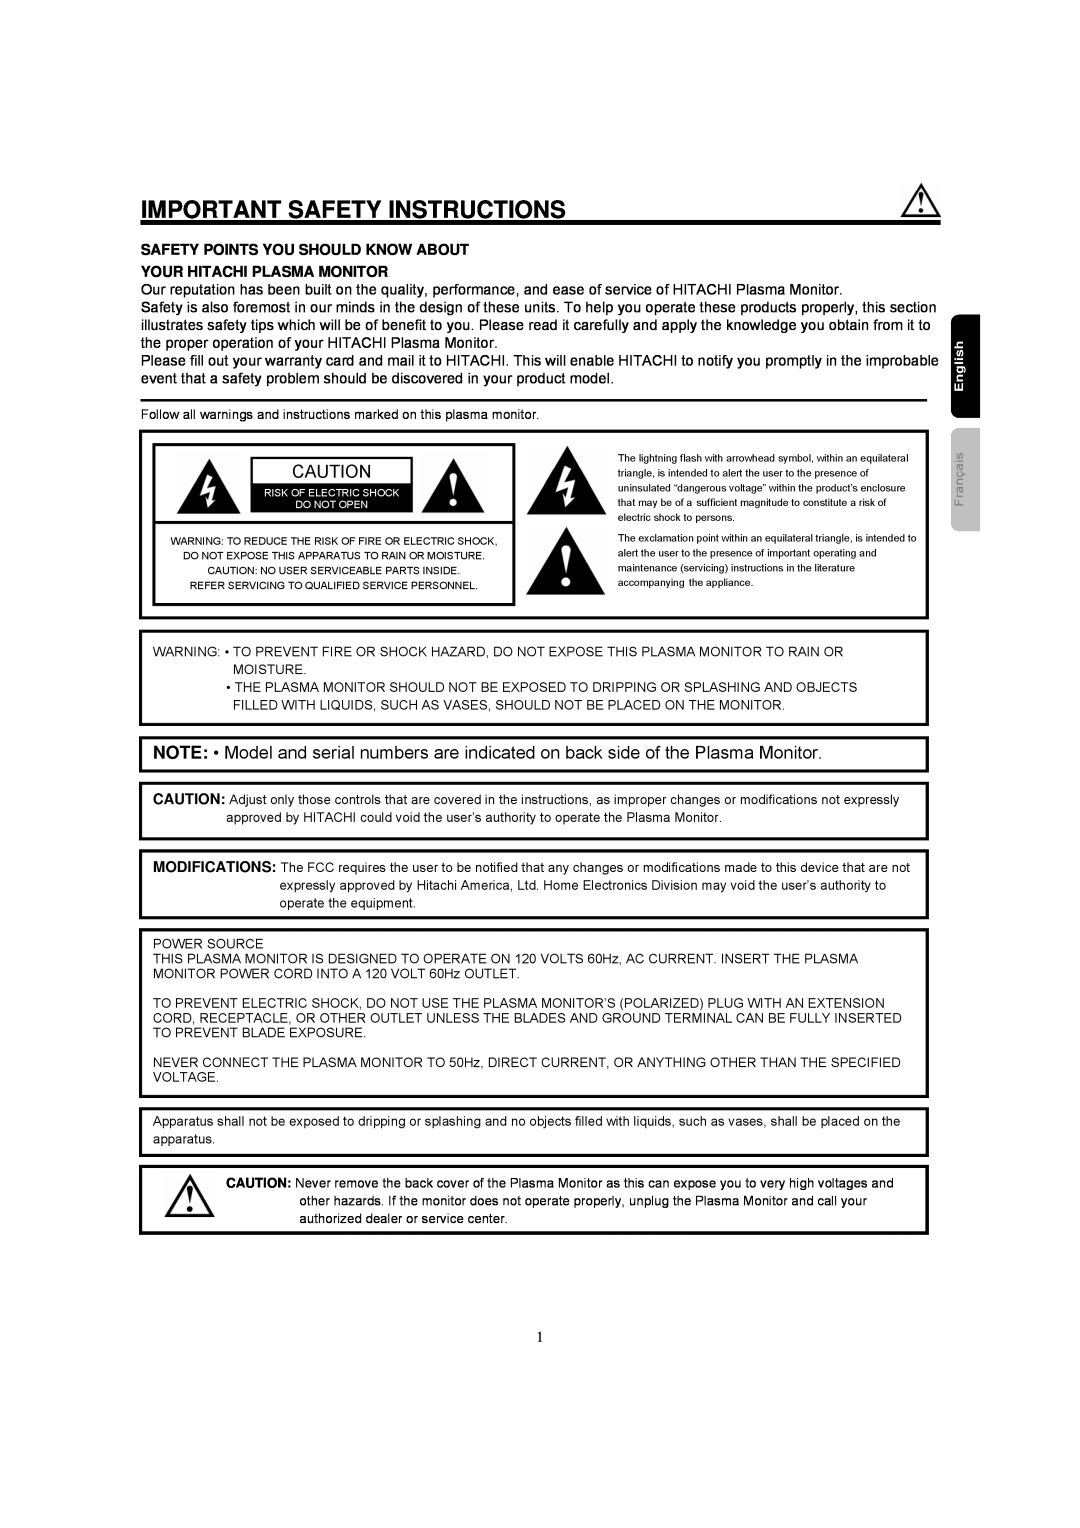 Hitachi 42HDM12A Important Safety Instructions, Safety Points You Should Know About Your Hitachi Plasma Monitor, English 